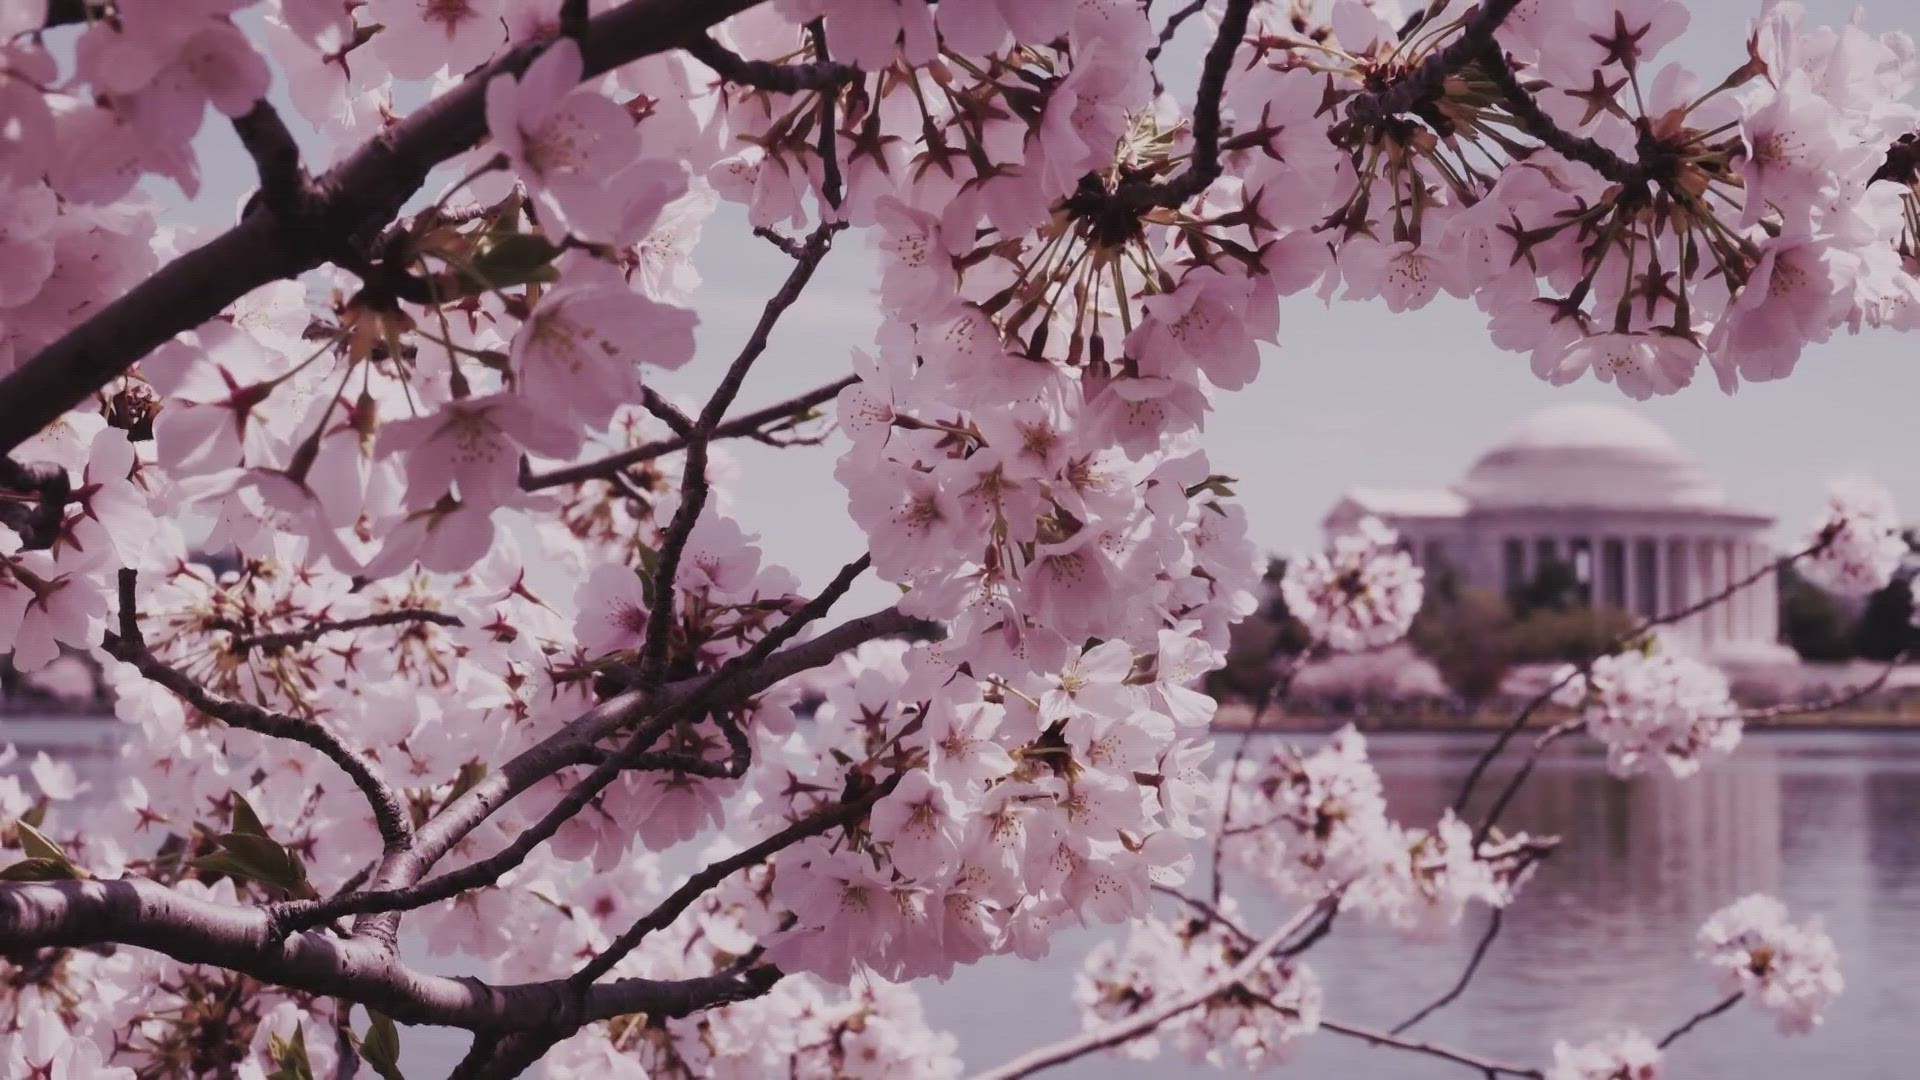 We now know the expected peak bloom of our iconic cherry BLOSSOM trees NEAR THE TIDAL BASIN.